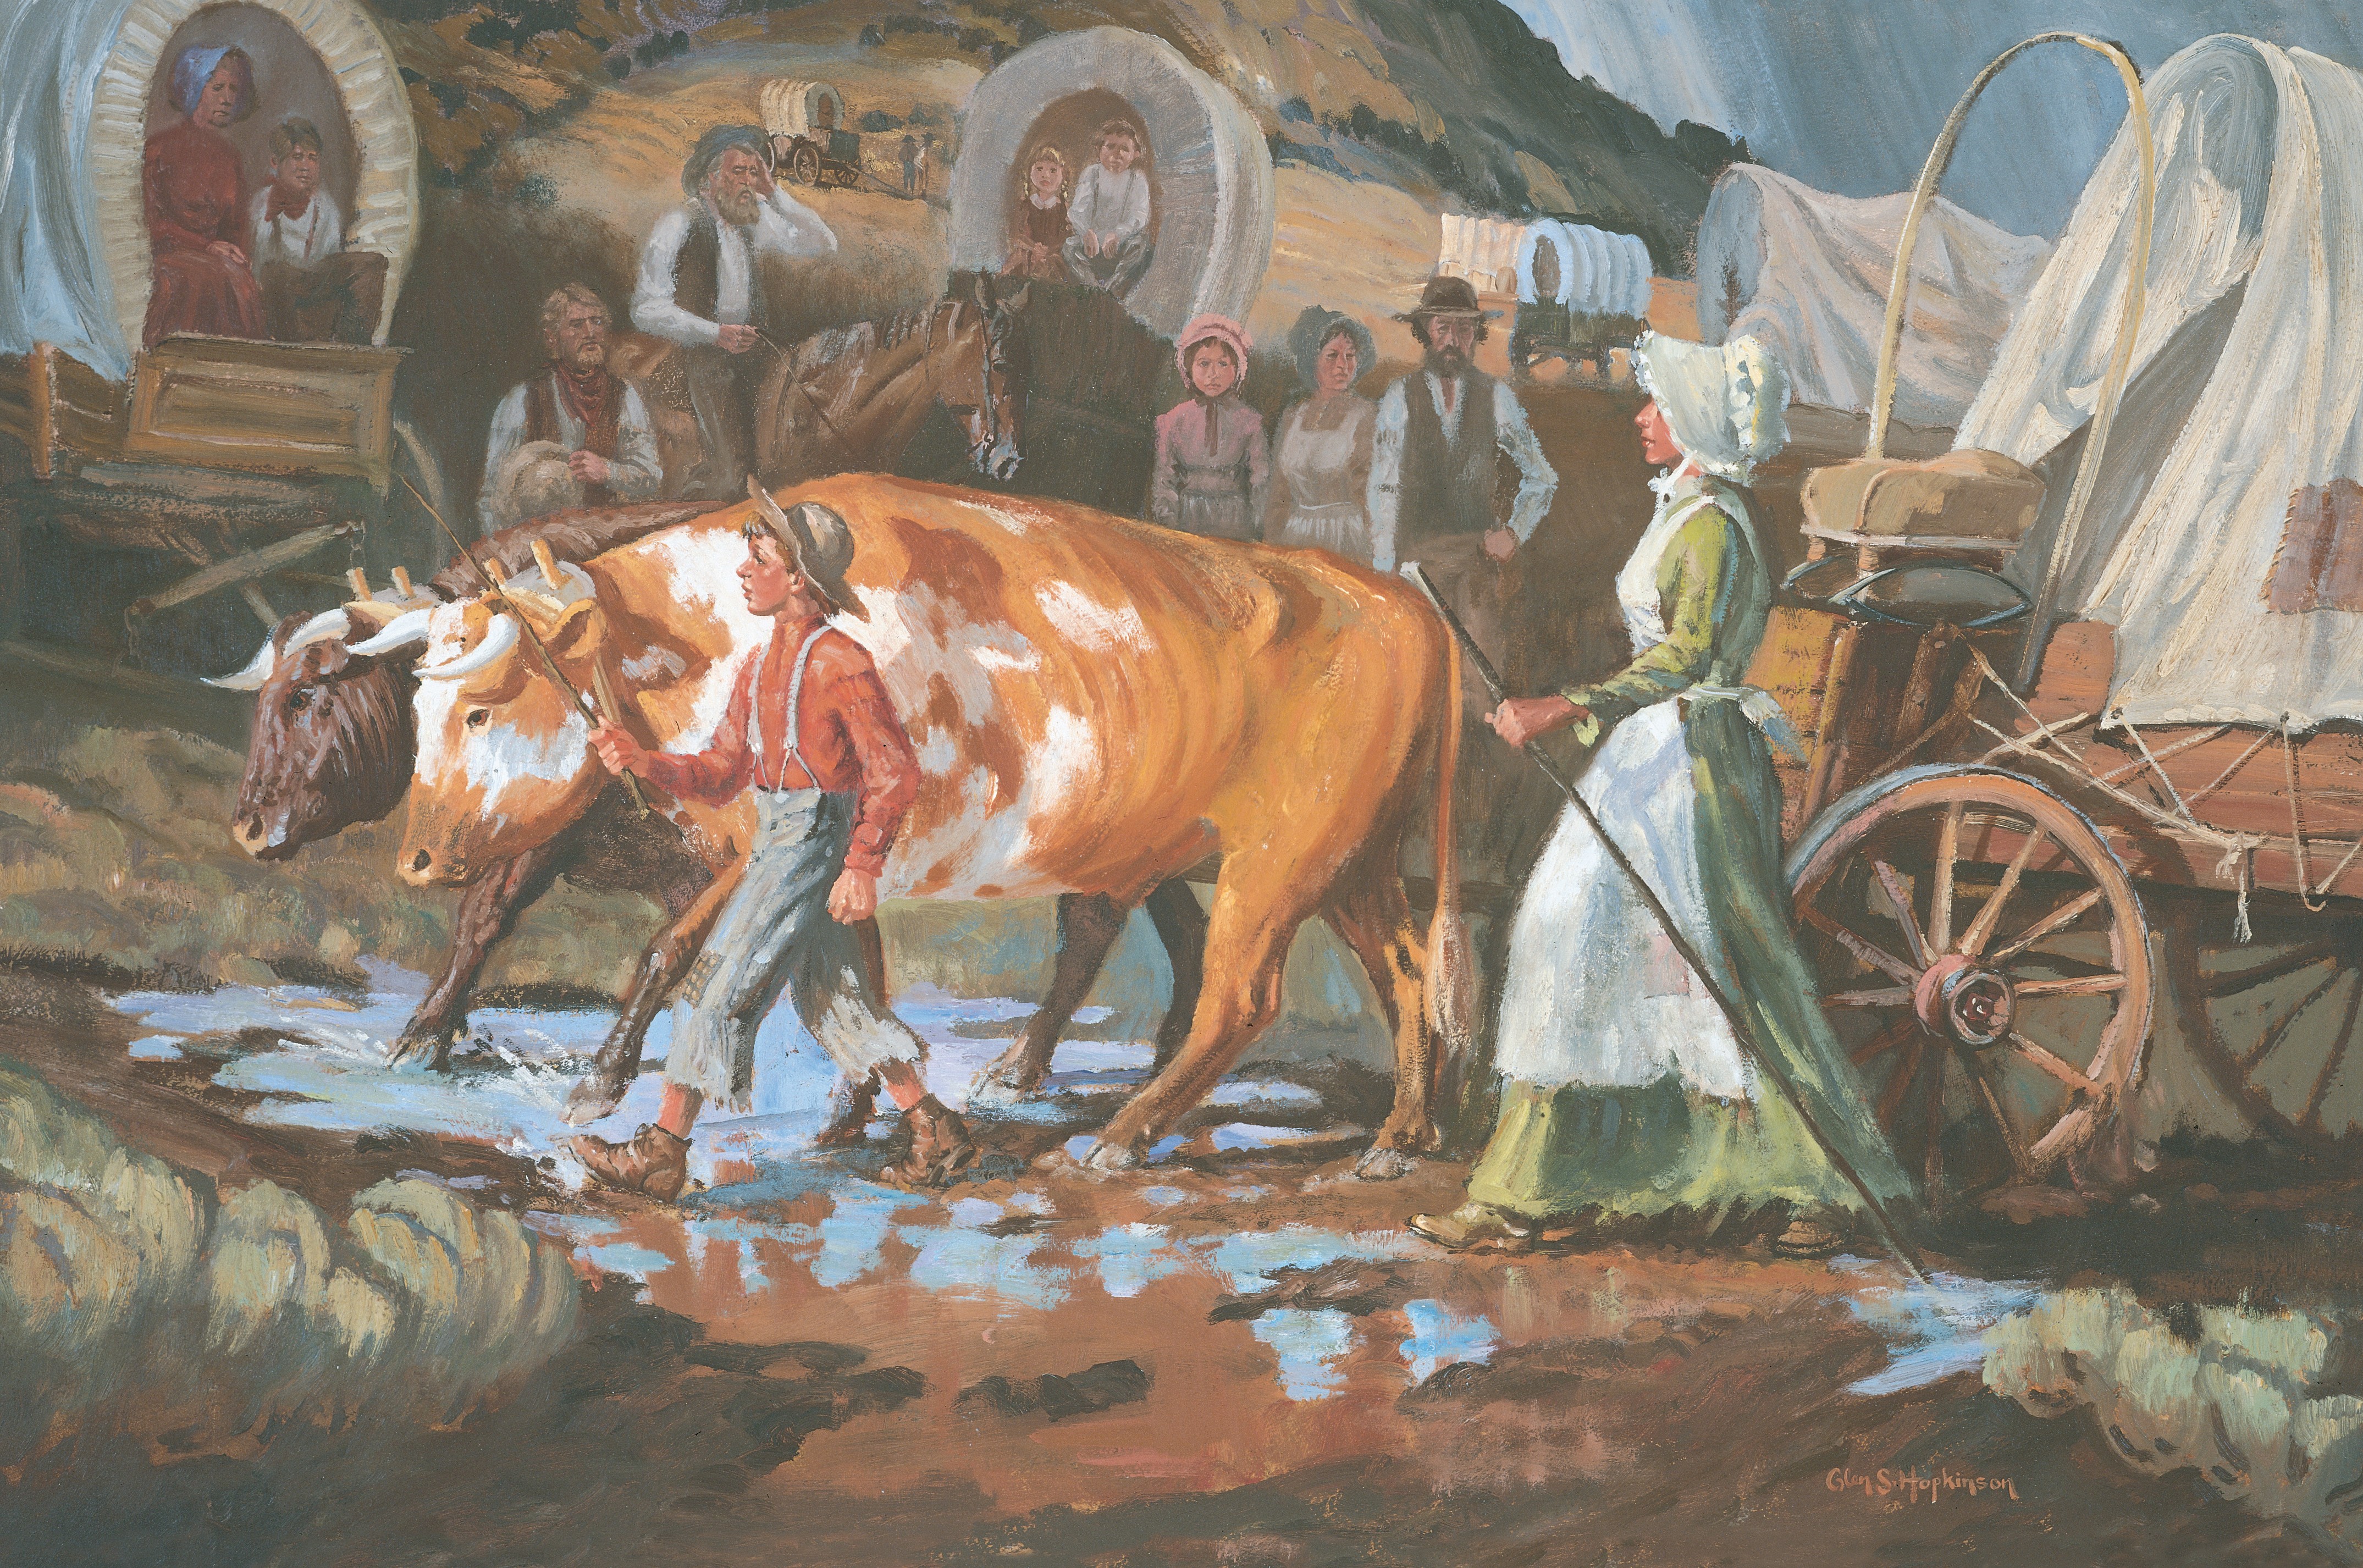 A painting by Glen S. Hopkinson depicting Joseph F. Smith as a young man walking next to the oxen pulling their wagon, with his mother, Mary Fielding Smith, following close behind.